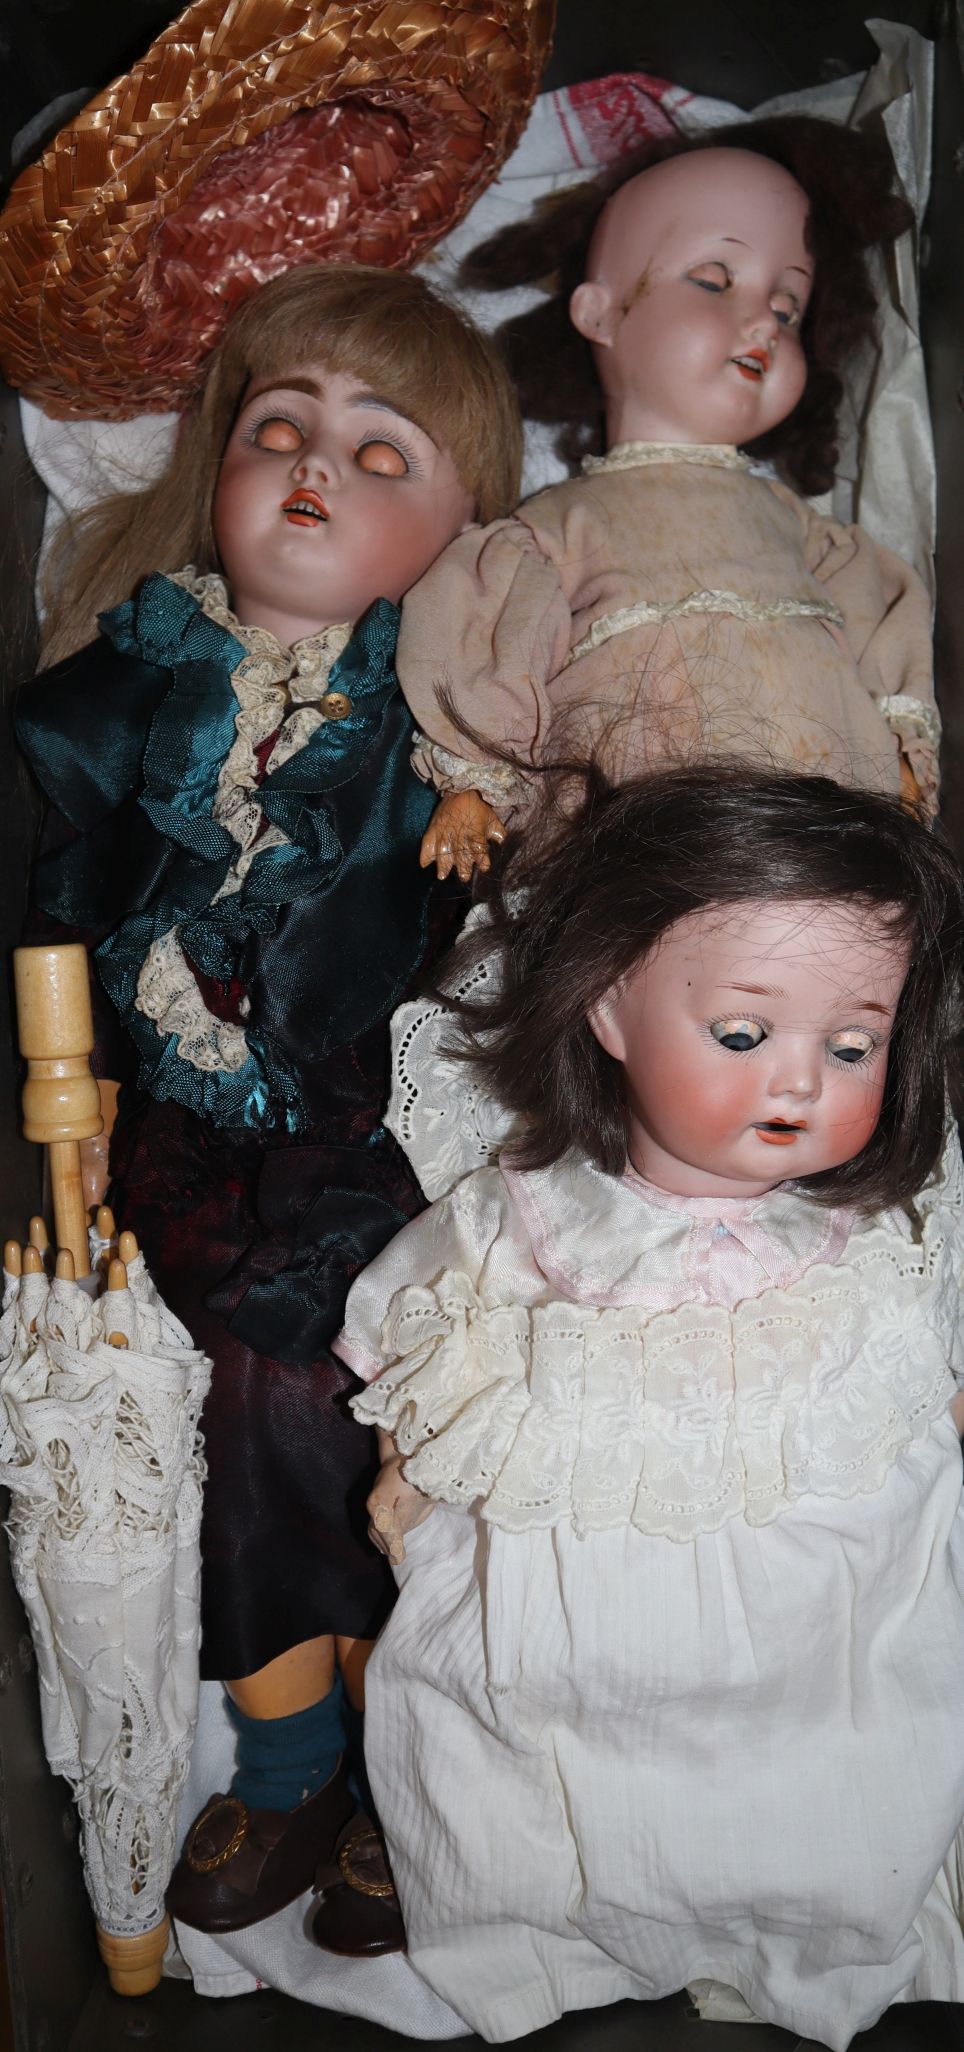 A Heubach 444 open mounted, pierced ears, jointed bisque headed doll in original costume and an